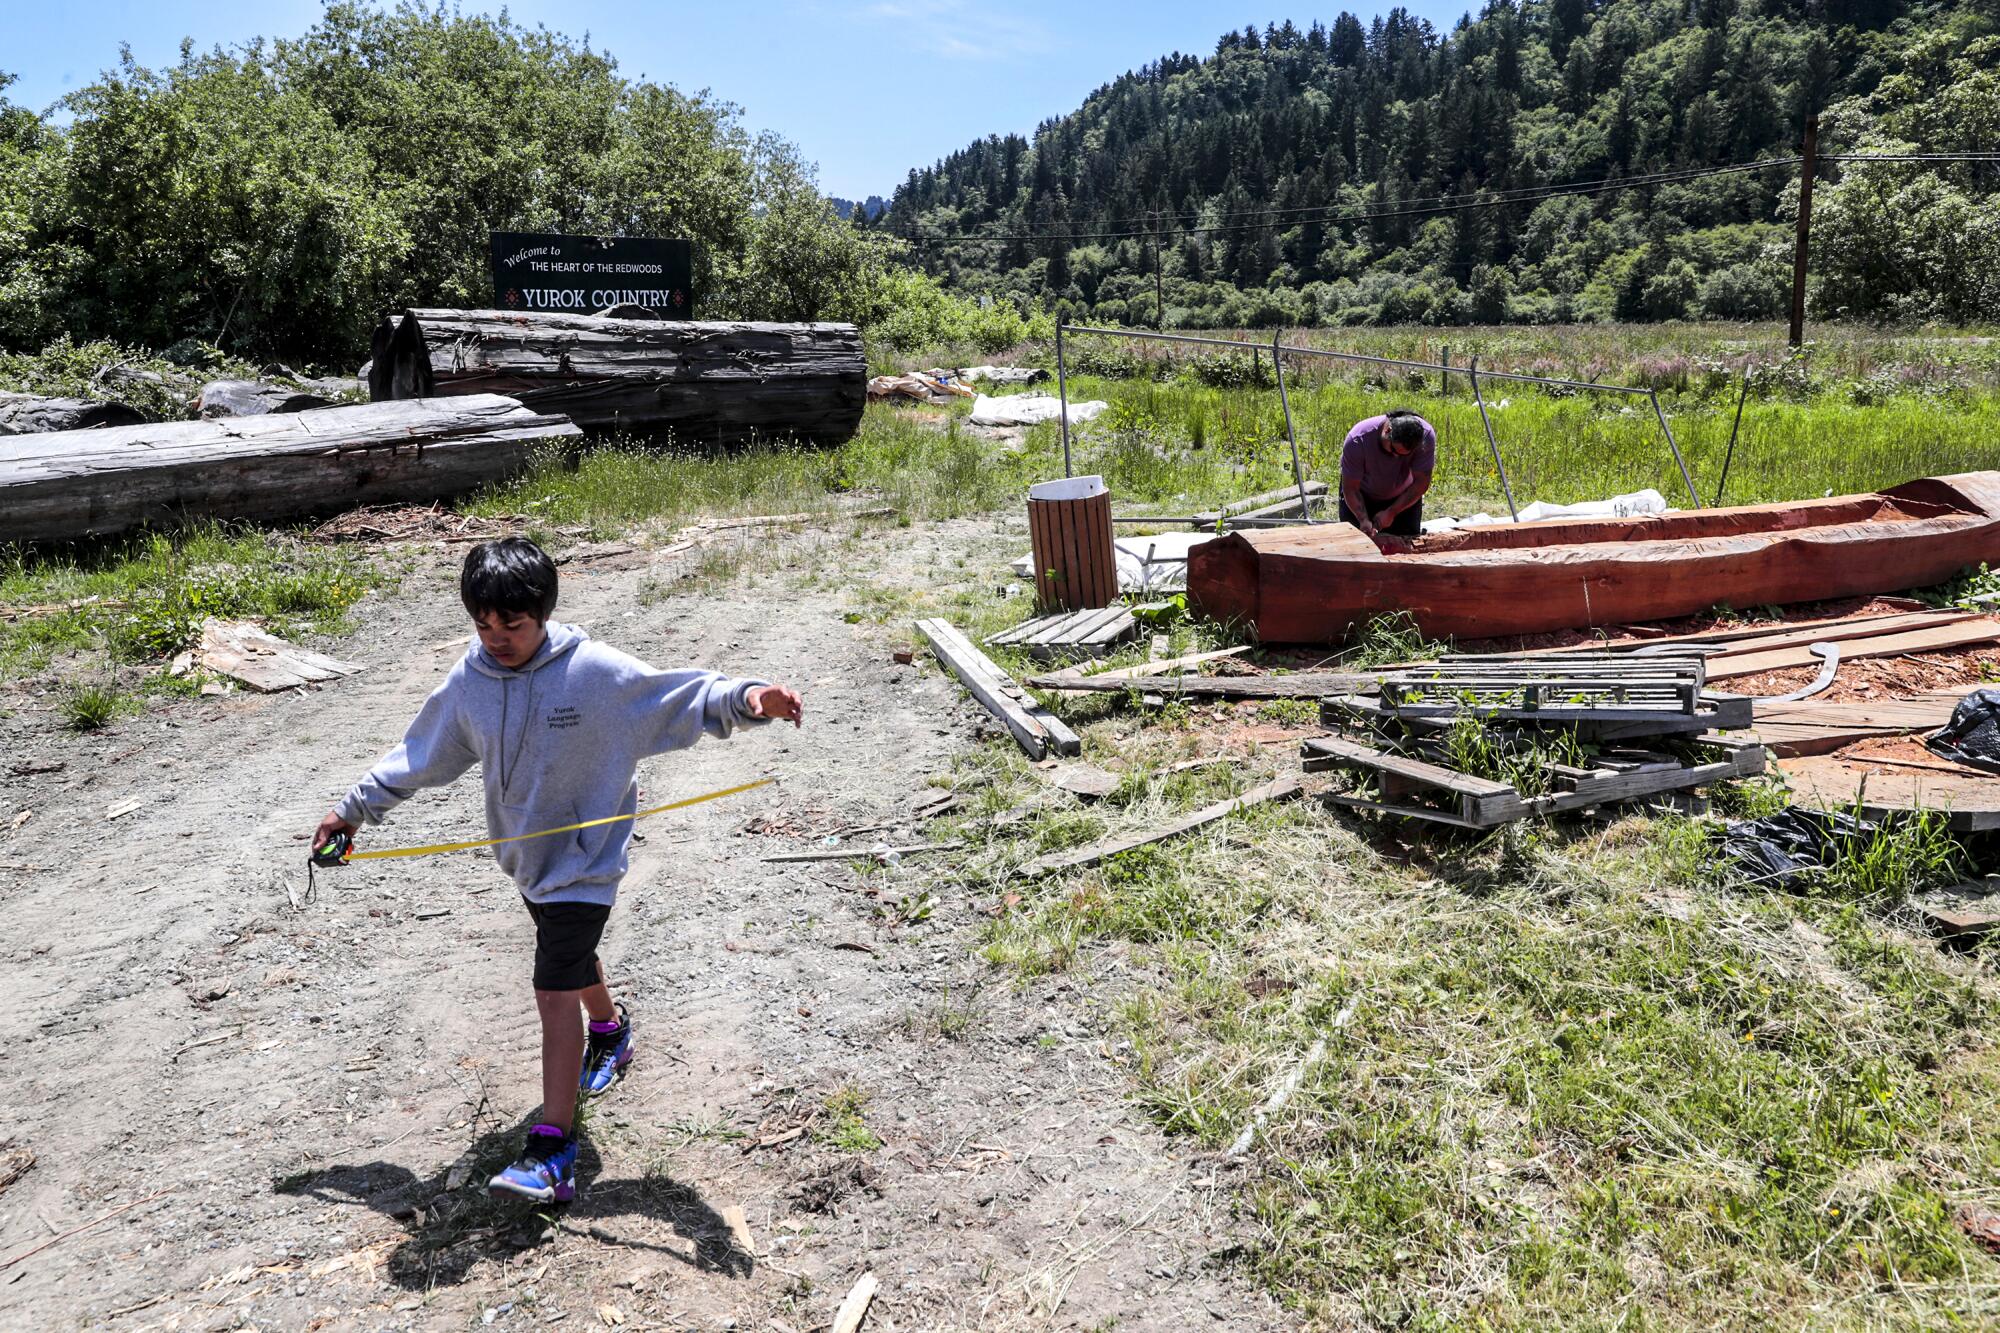 A Yurok boy plays while his father works on a canoe.